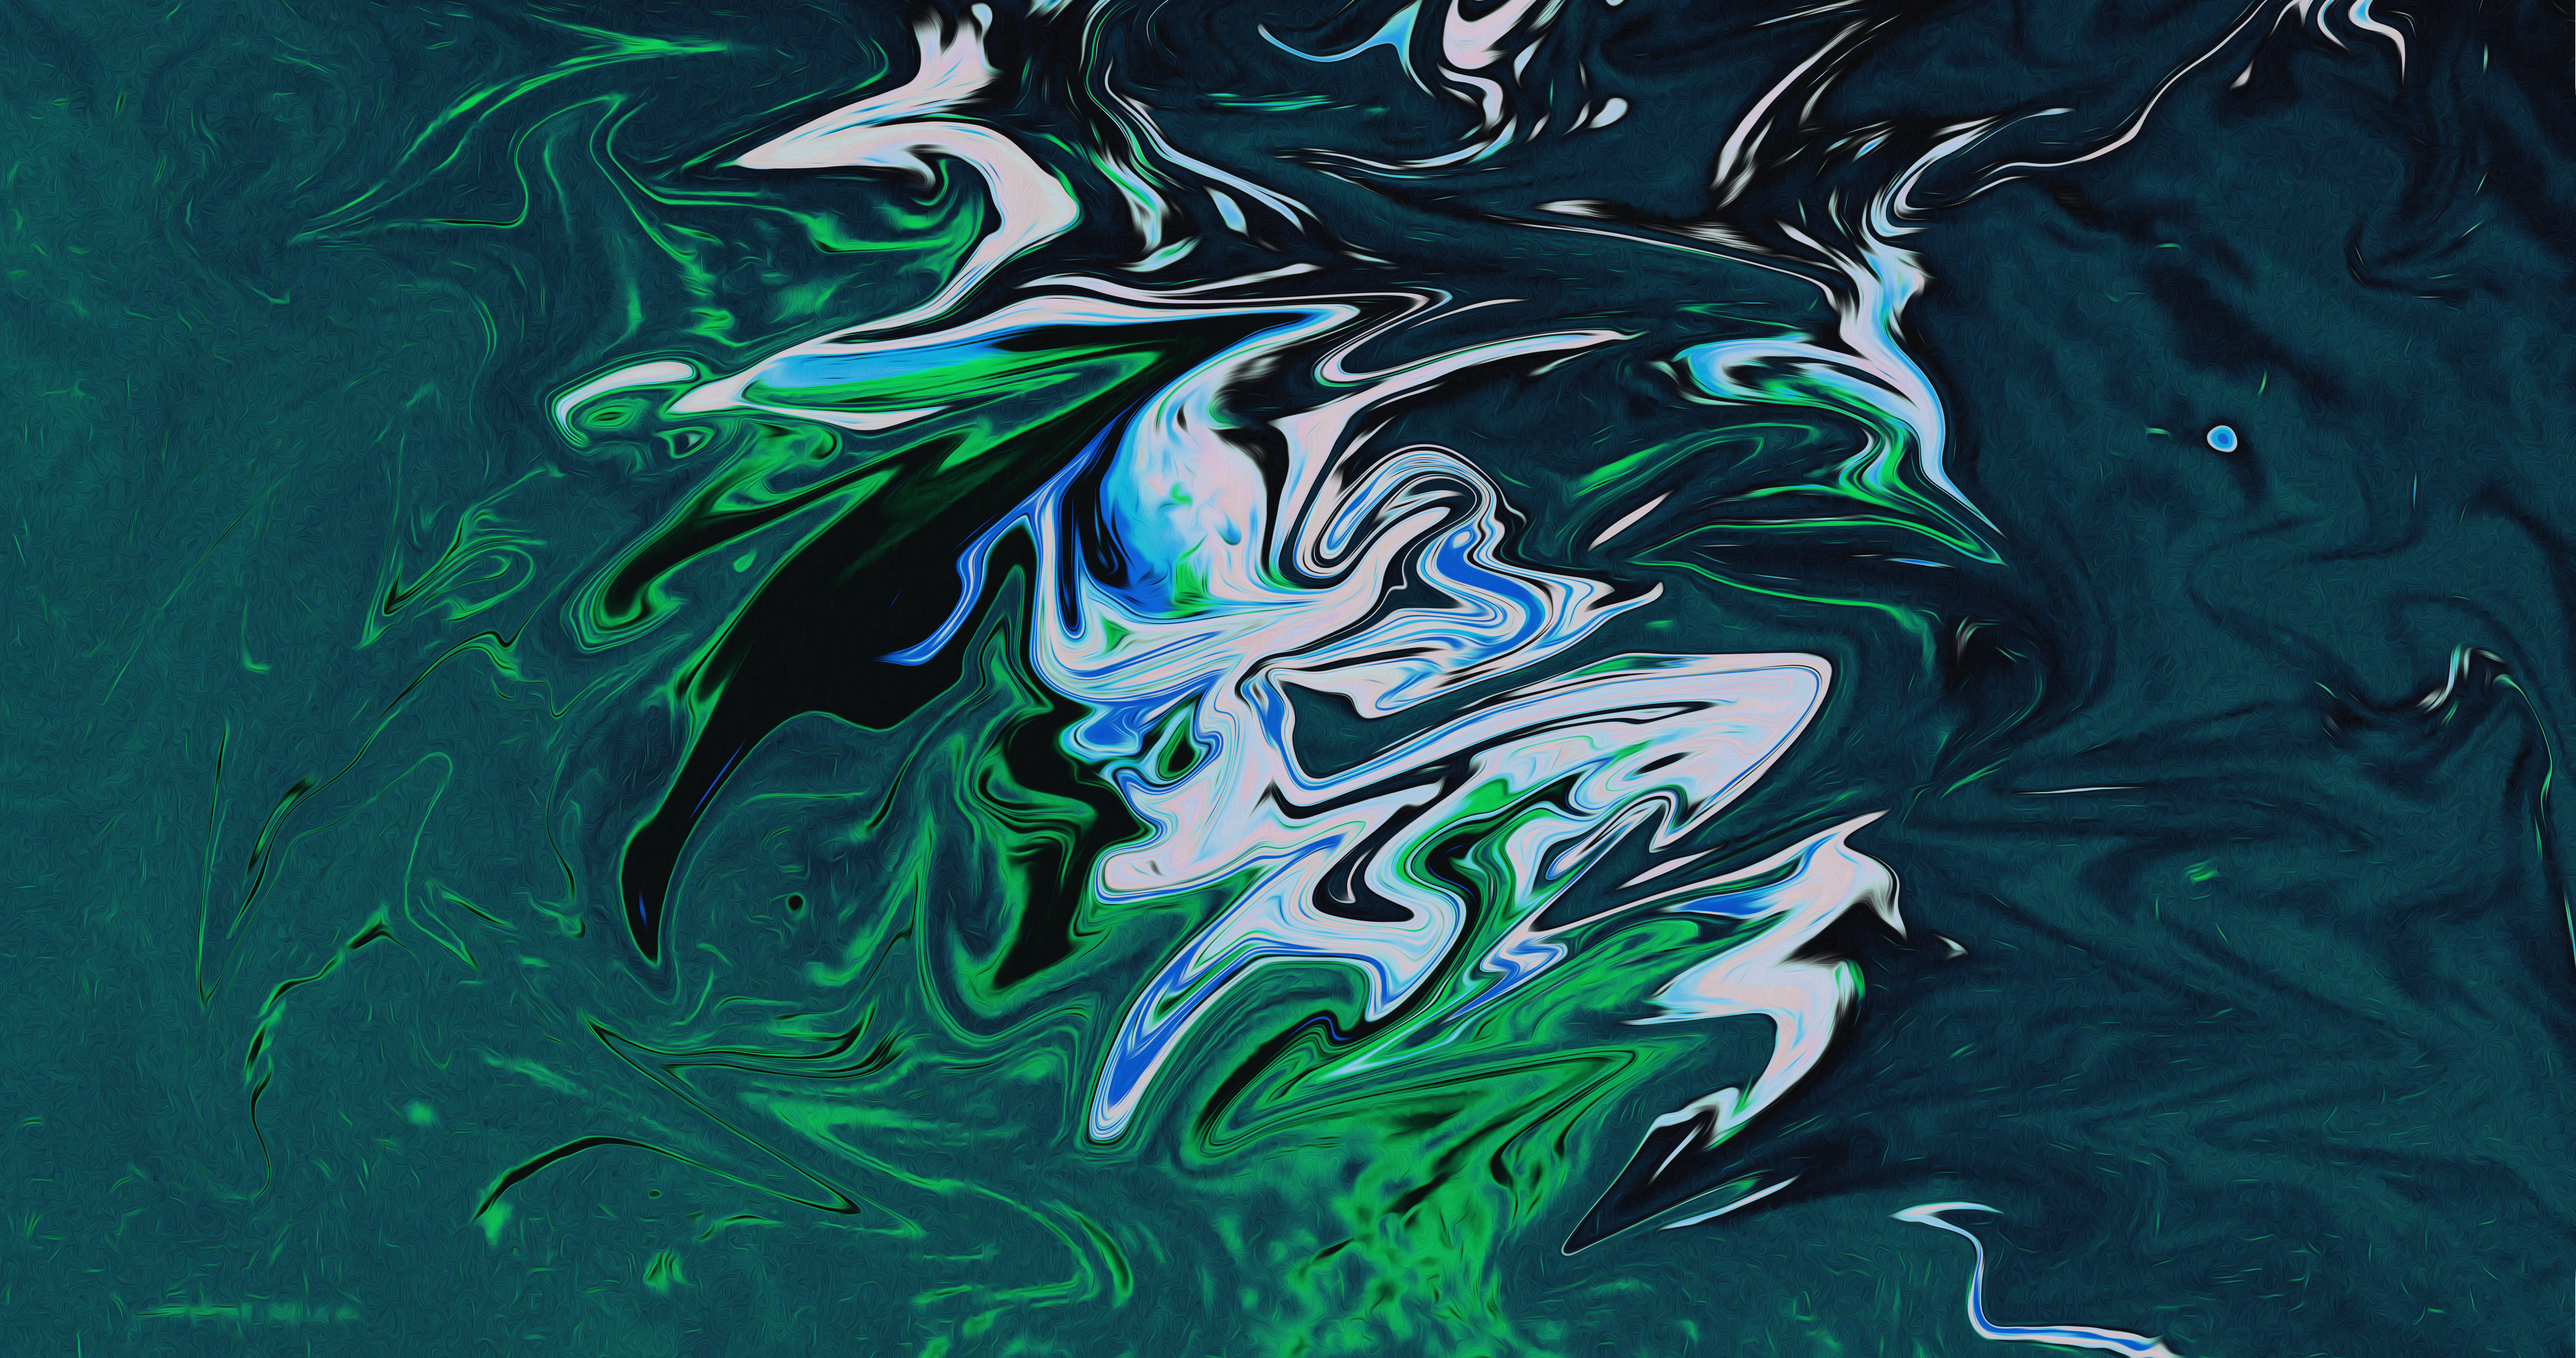 General 8192x4320 abstract fluid liquid interference dark green colorful artwork digital art paint brushes oil painting paint splash shapes blue